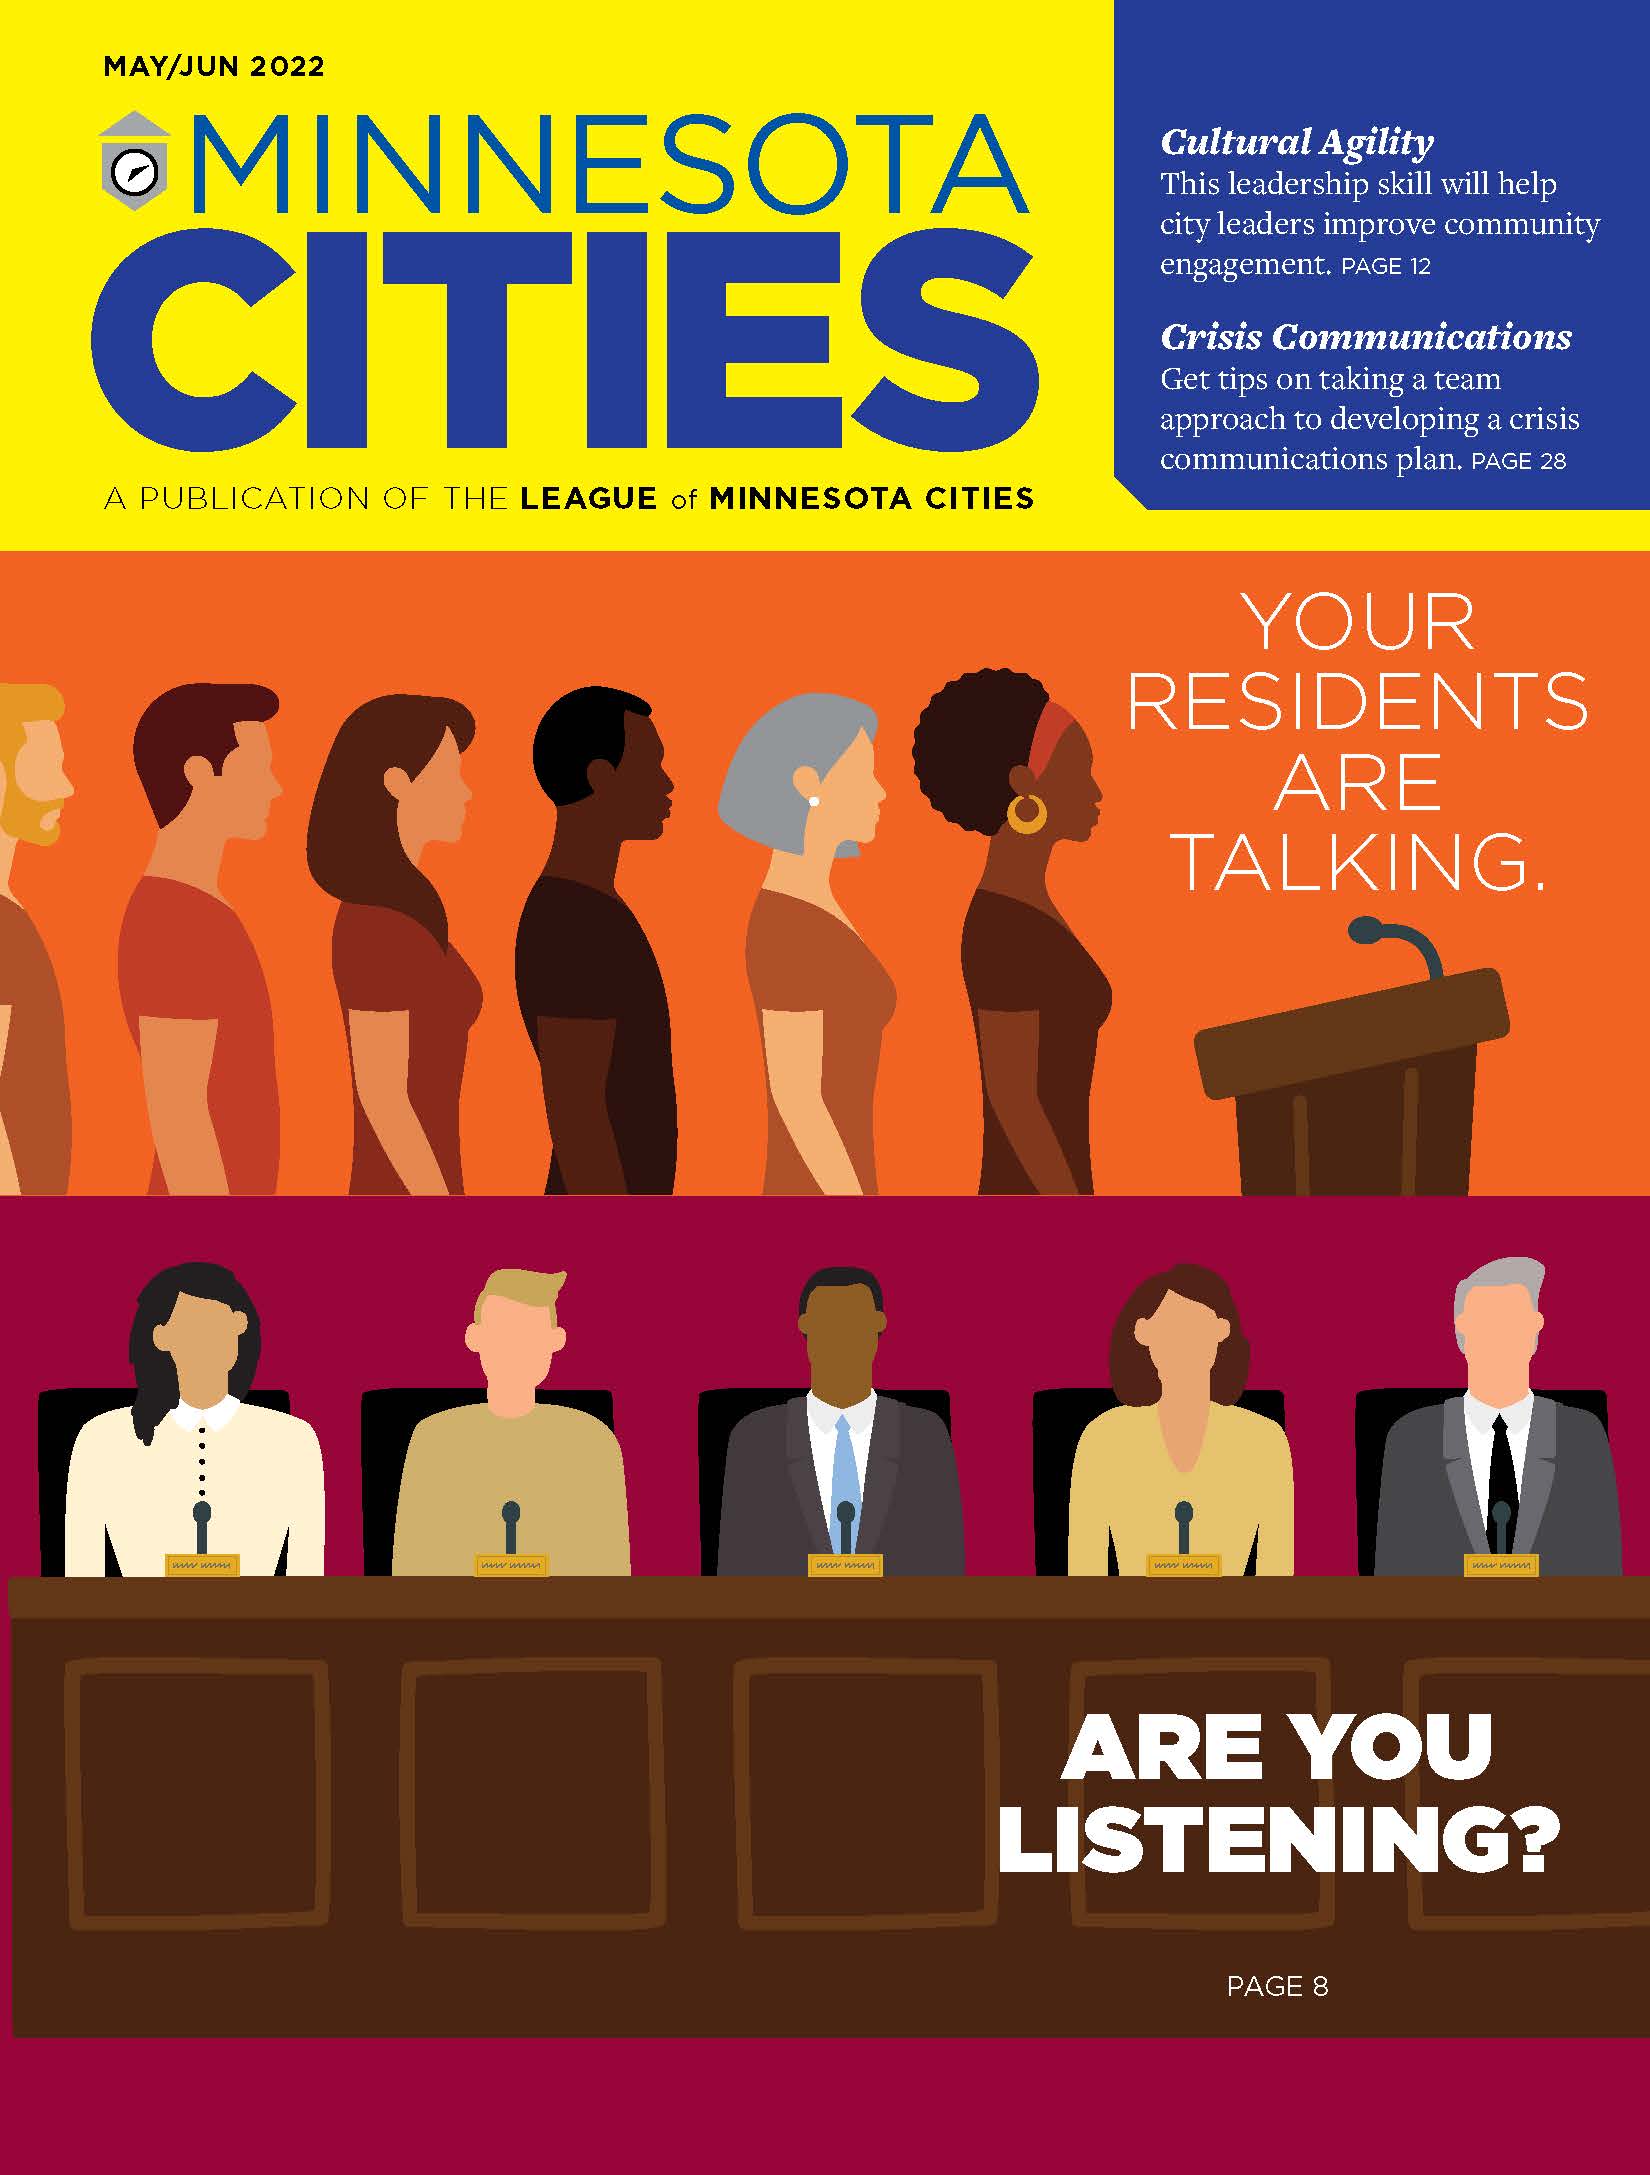 Magazine cover with illustration of a city council meeting